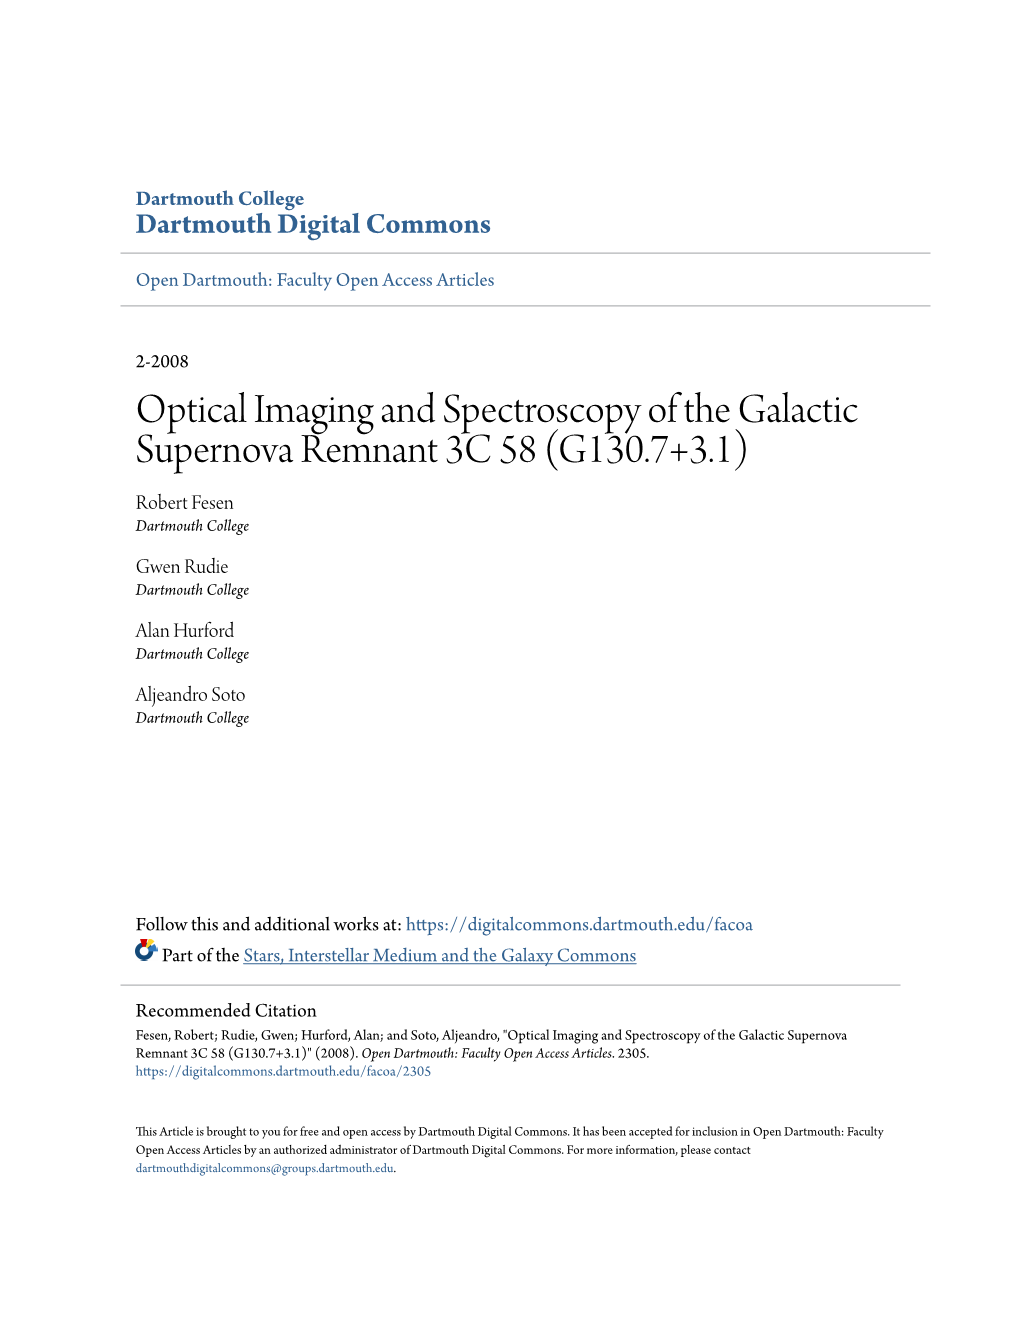 Optical Imaging and Spectroscopy of the Galactic Supernova Remnant 3C 58 (G130.7+3.1) Robert Fesen Dartmouth College